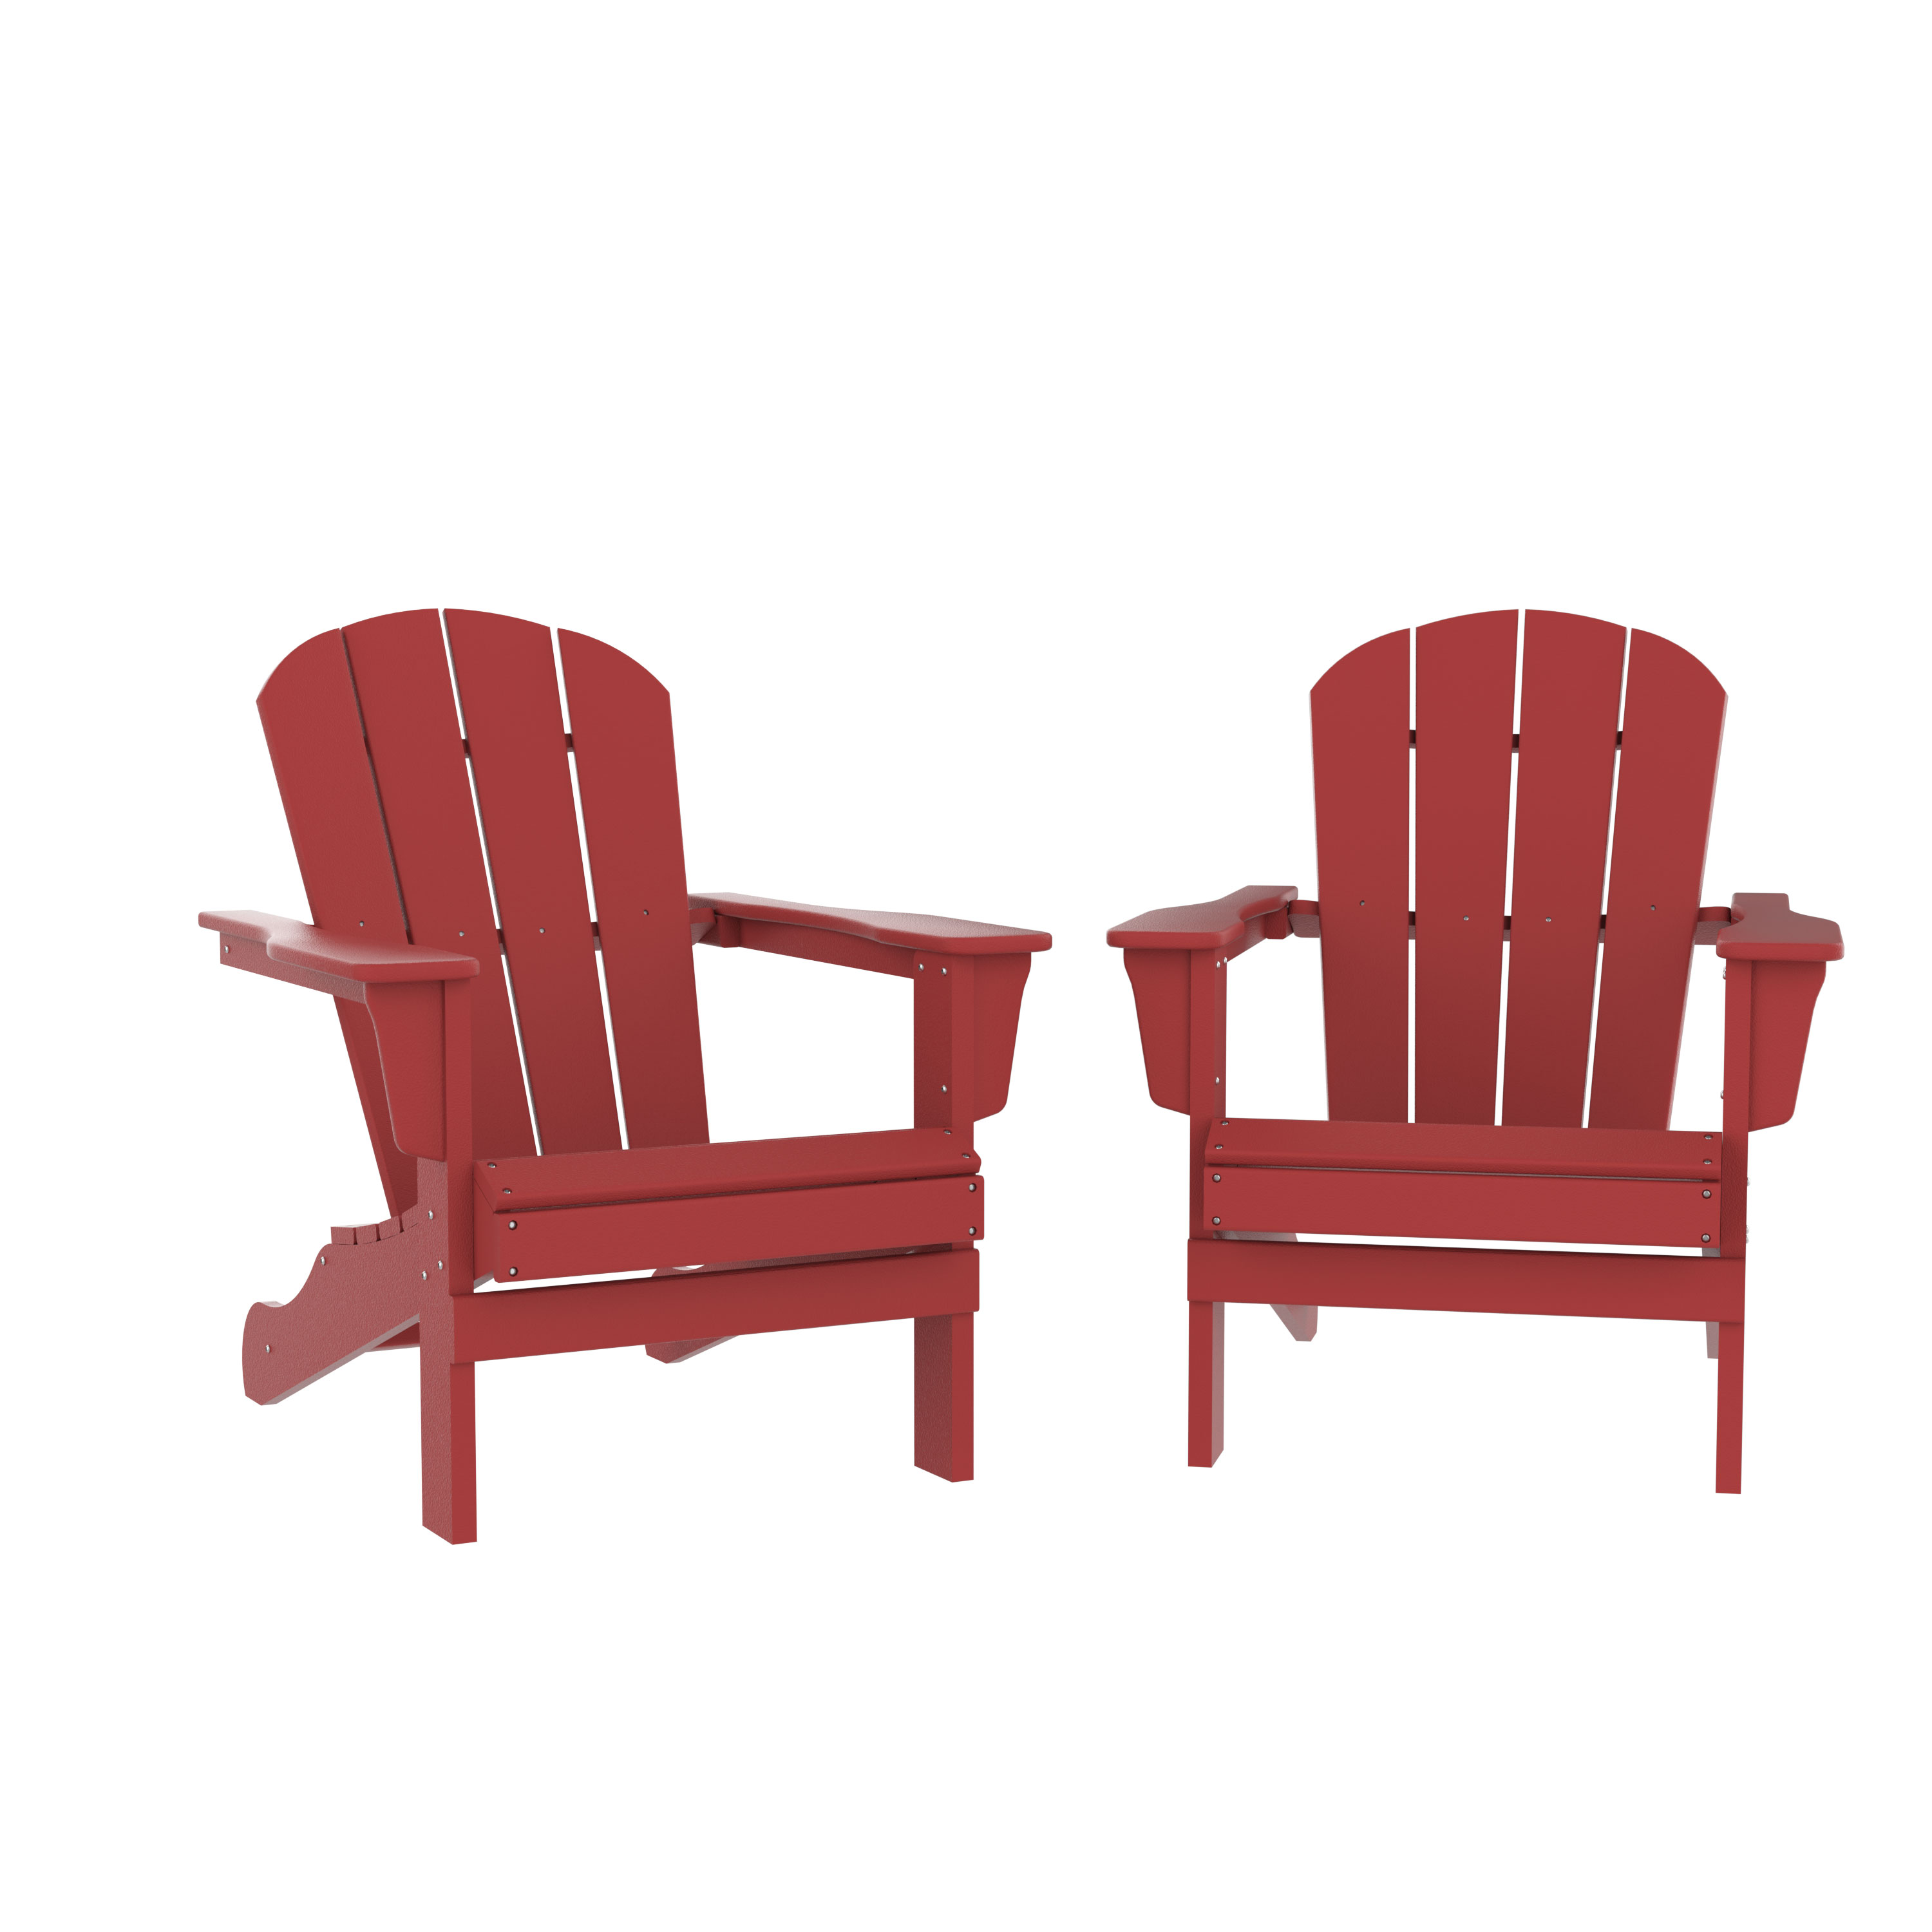 Sportaza HDPE Chair, Fire Pit Chairs, Sand Chair, Patio Outdoor Chairs,DPE Plastic Resin Deck Chair, lawn chairs, Adult Size ,Weather Resistant for Patio/ Backyard/Garden, Red, Set of 2 - image 4 of 6